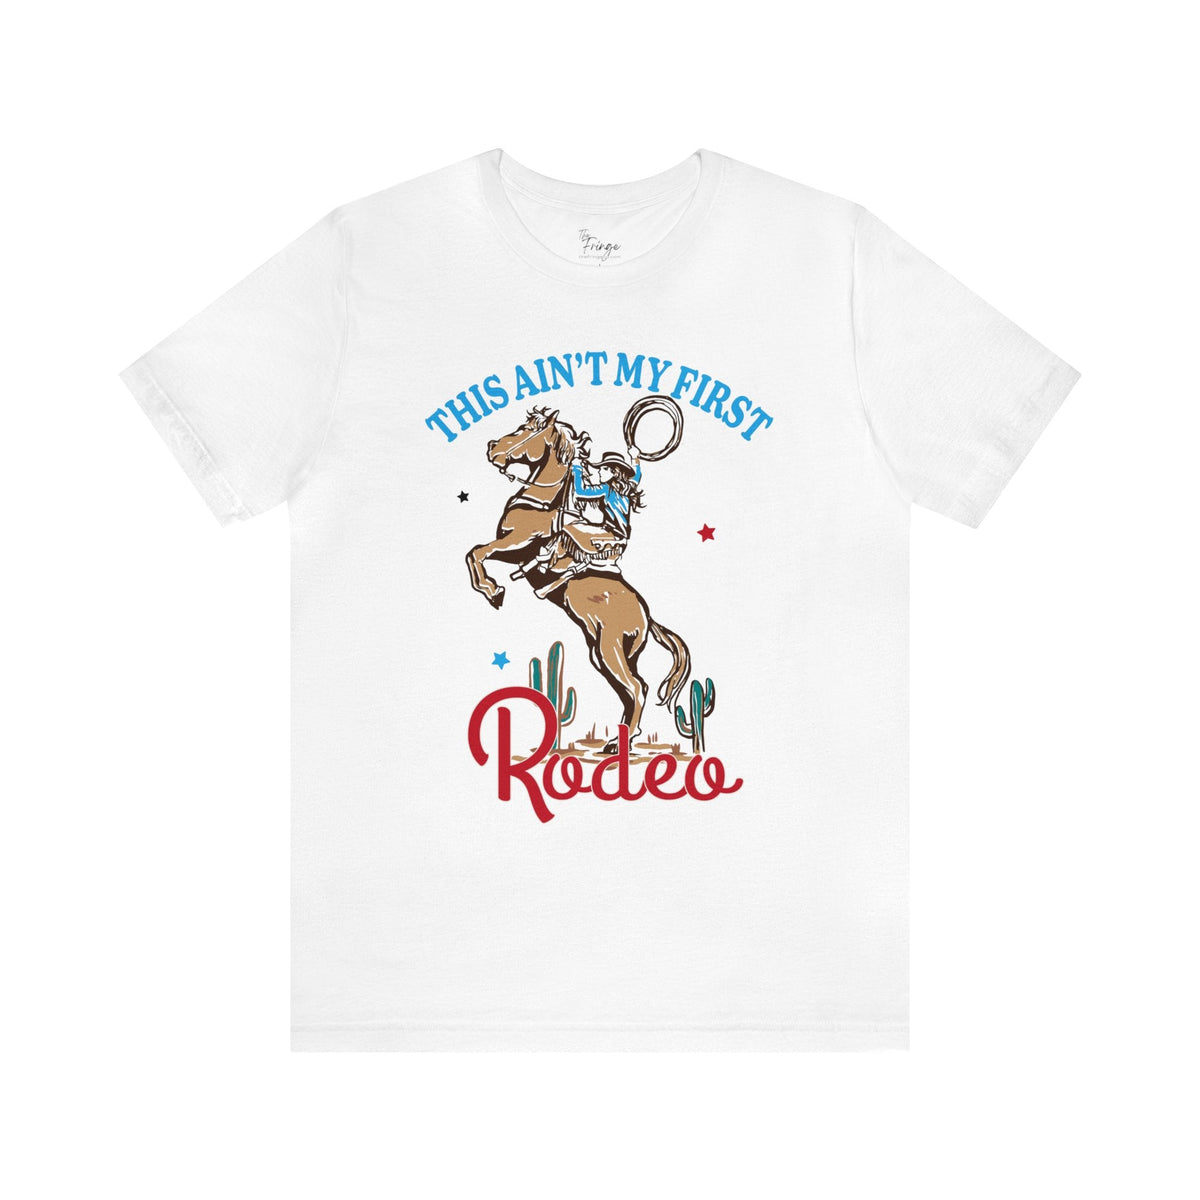 This Ain't My First Rodeo Tee | Women's Country Graphic Tees | Cowgirl T-shirts T-Shirt TheFringeCultureCollective